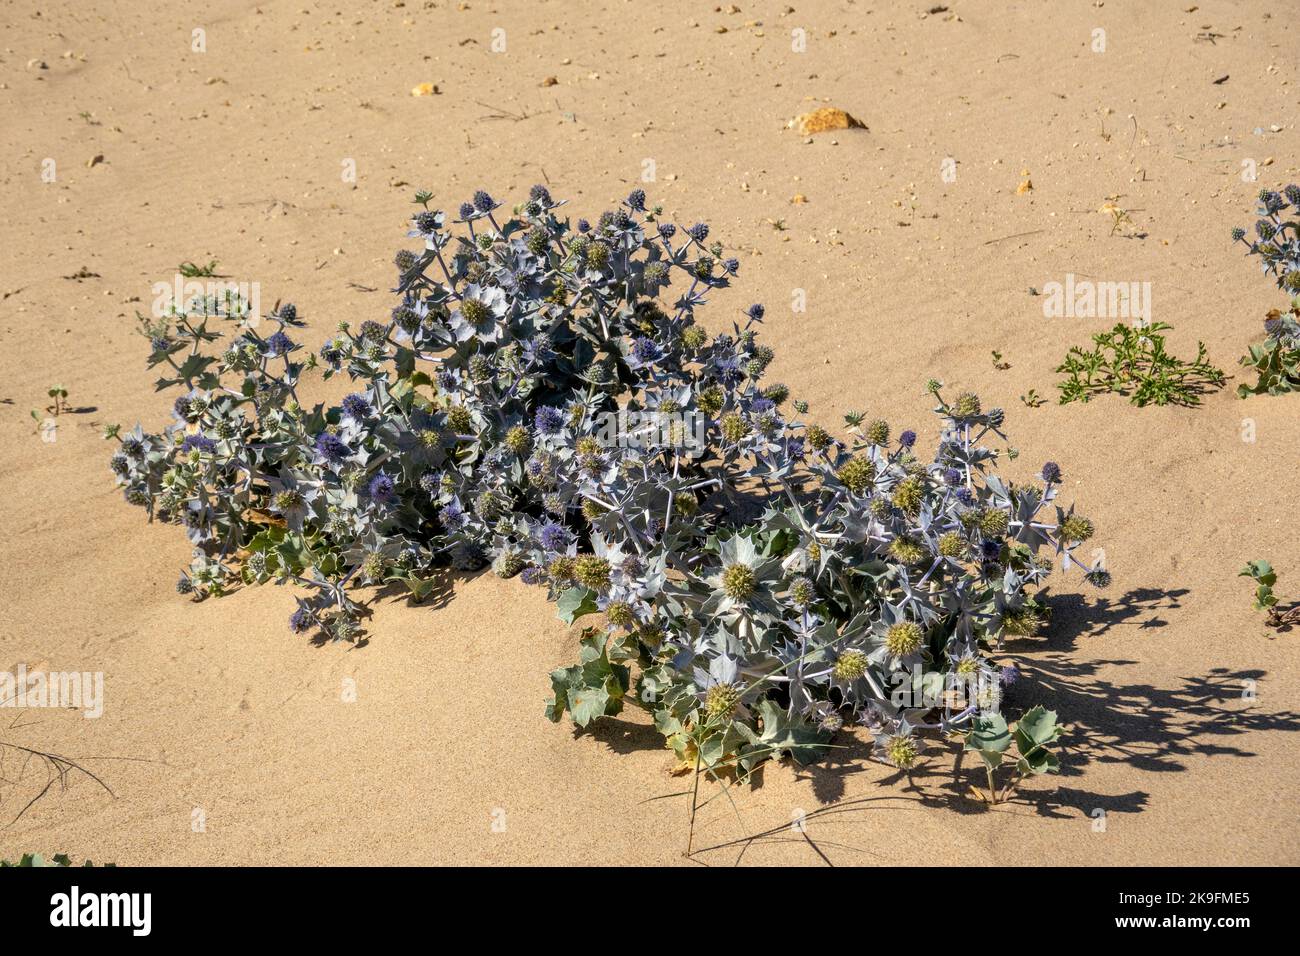 Close up view detail of a Eryngium maritimum plant, typical of sand dunes in Portugal, Europe. Stock Photo